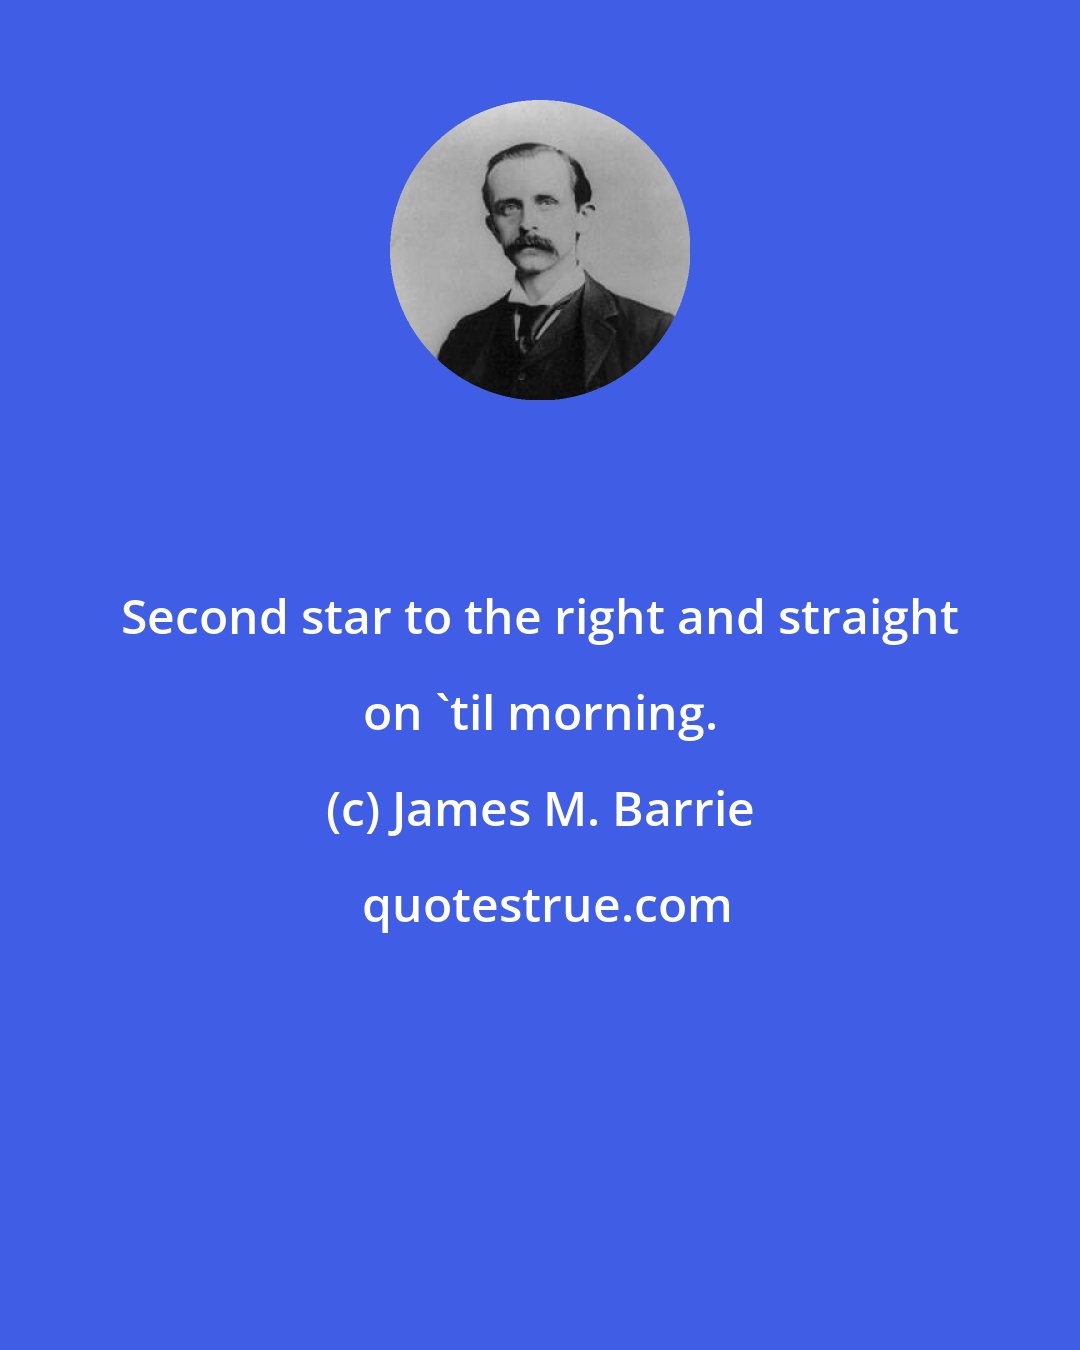 James M. Barrie: Second star to the right and straight on 'til morning.